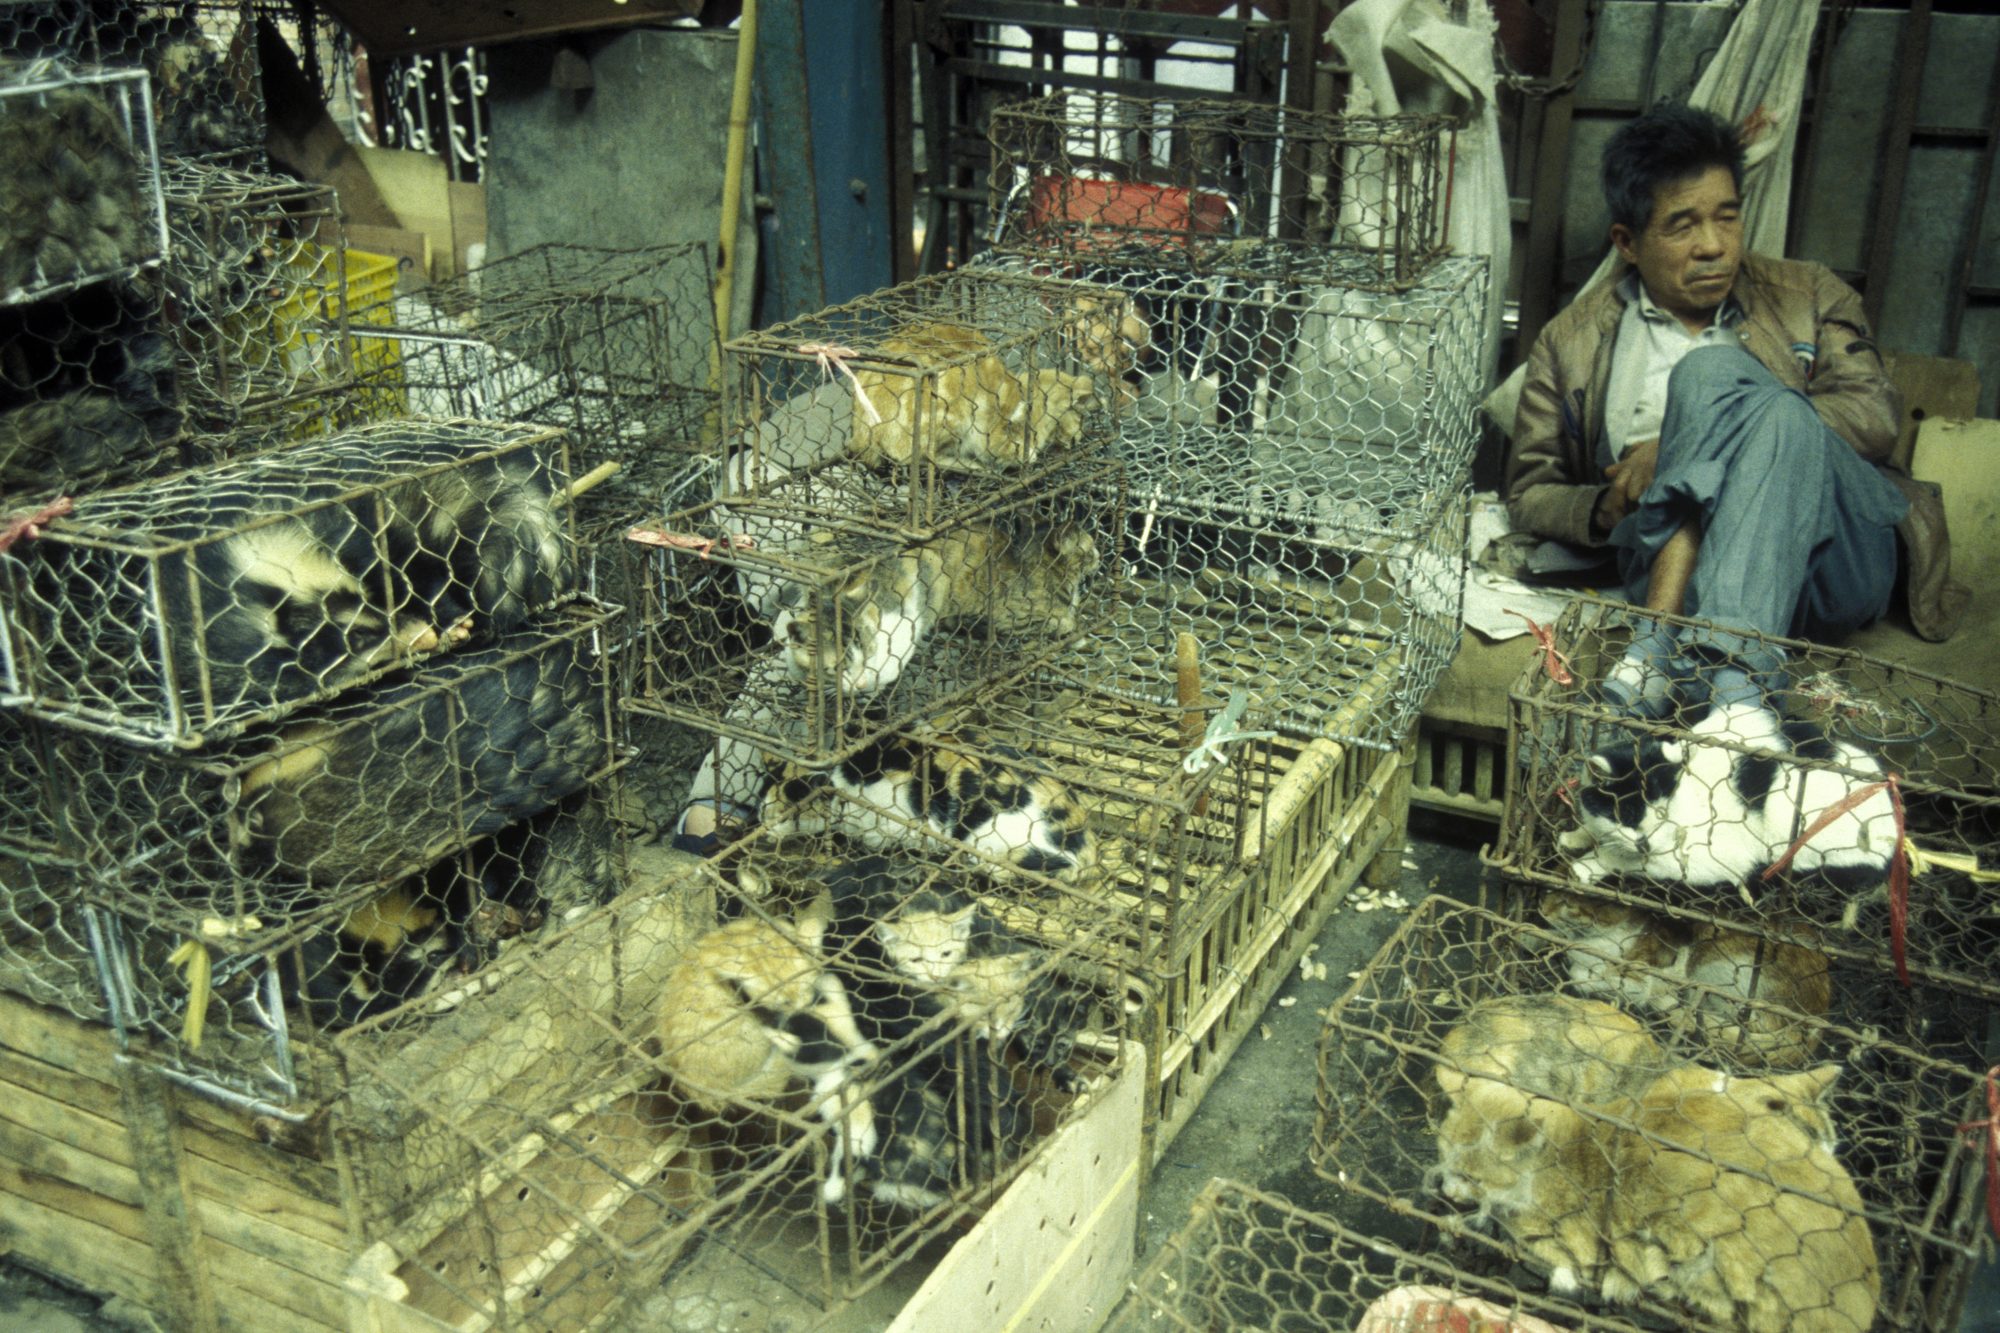 Meat and live animal market in China, live animals in cages 